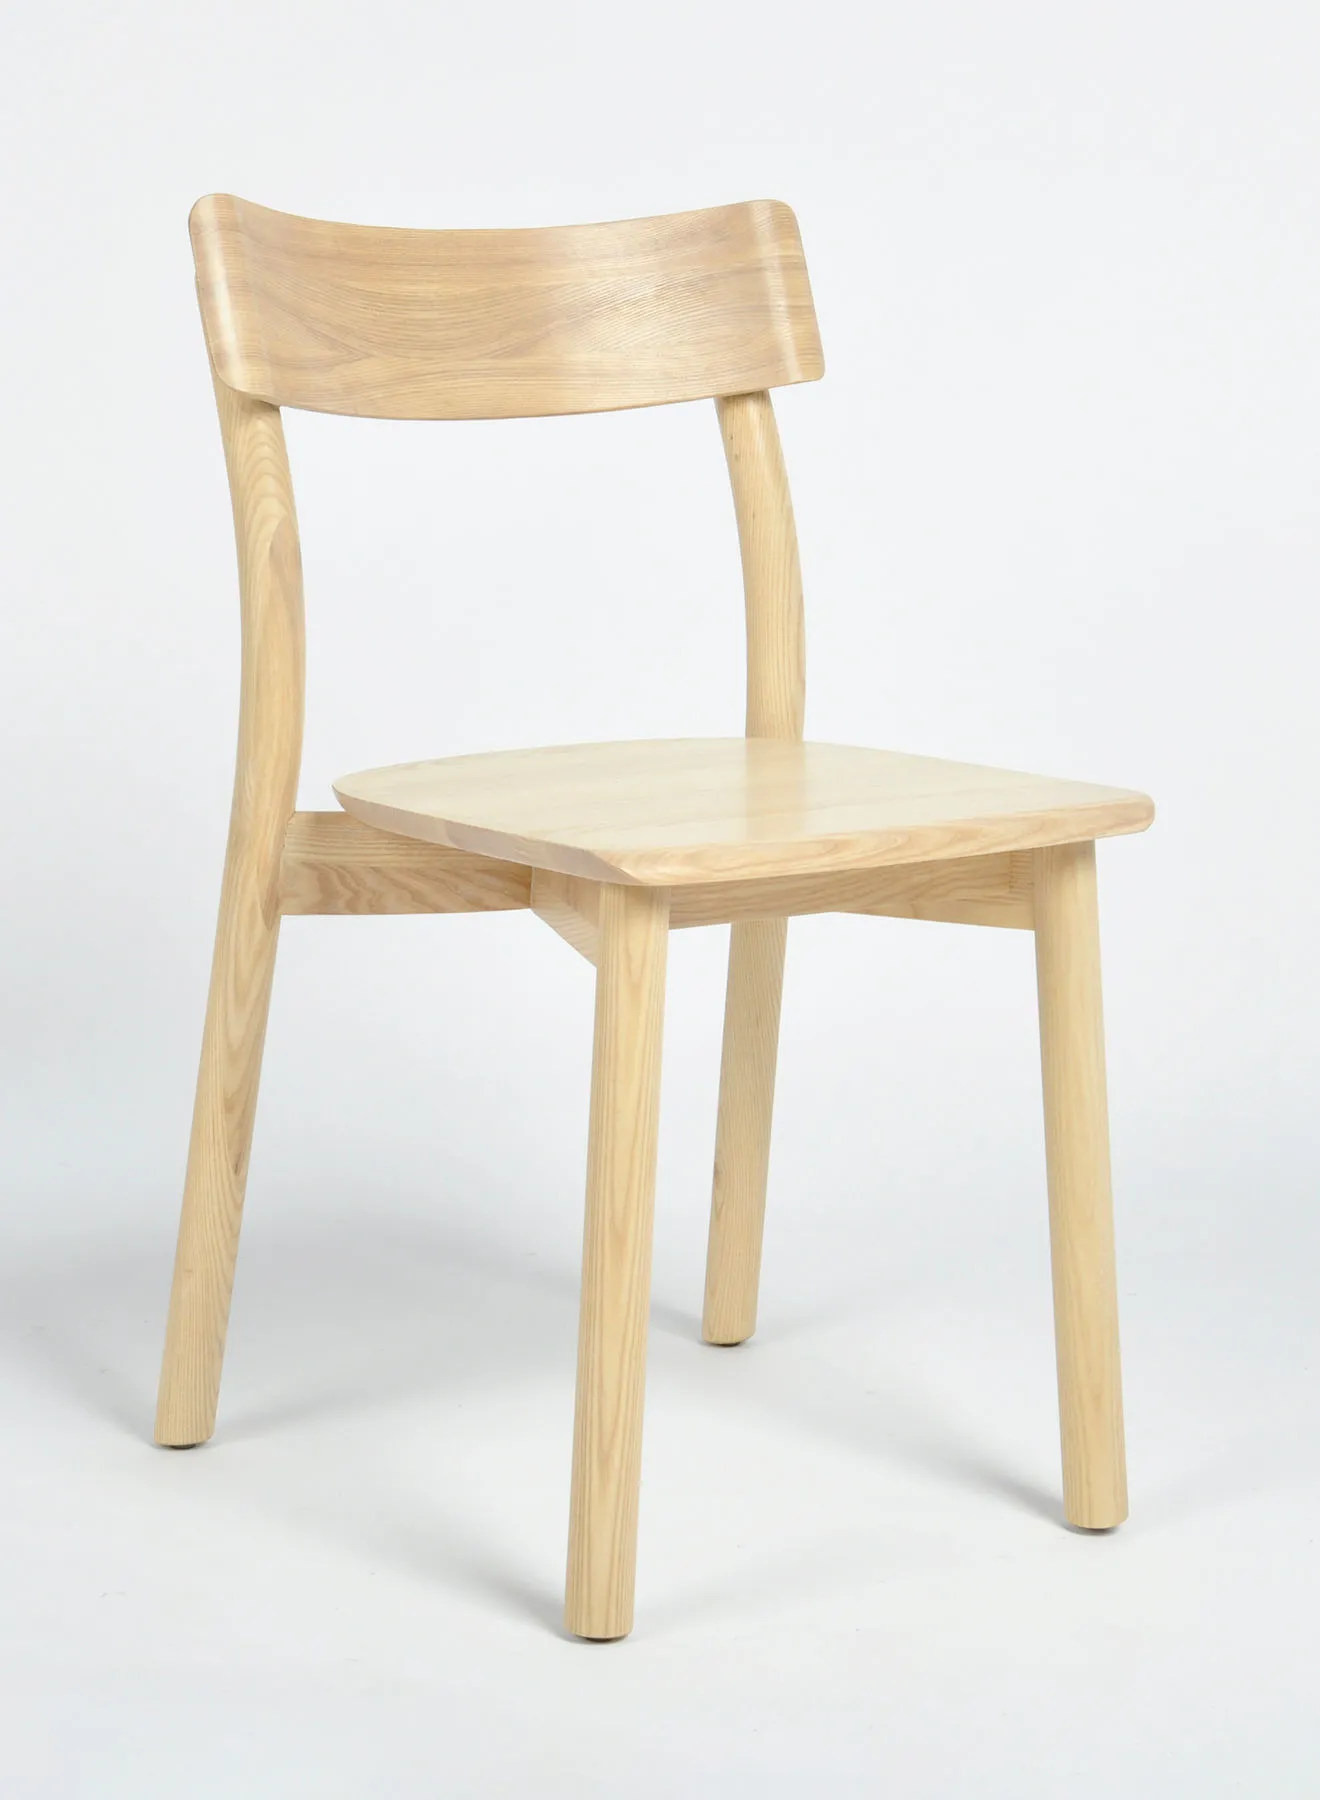 Switch Armchair In Natural Wooden Chair Size 49 X 50 X 81